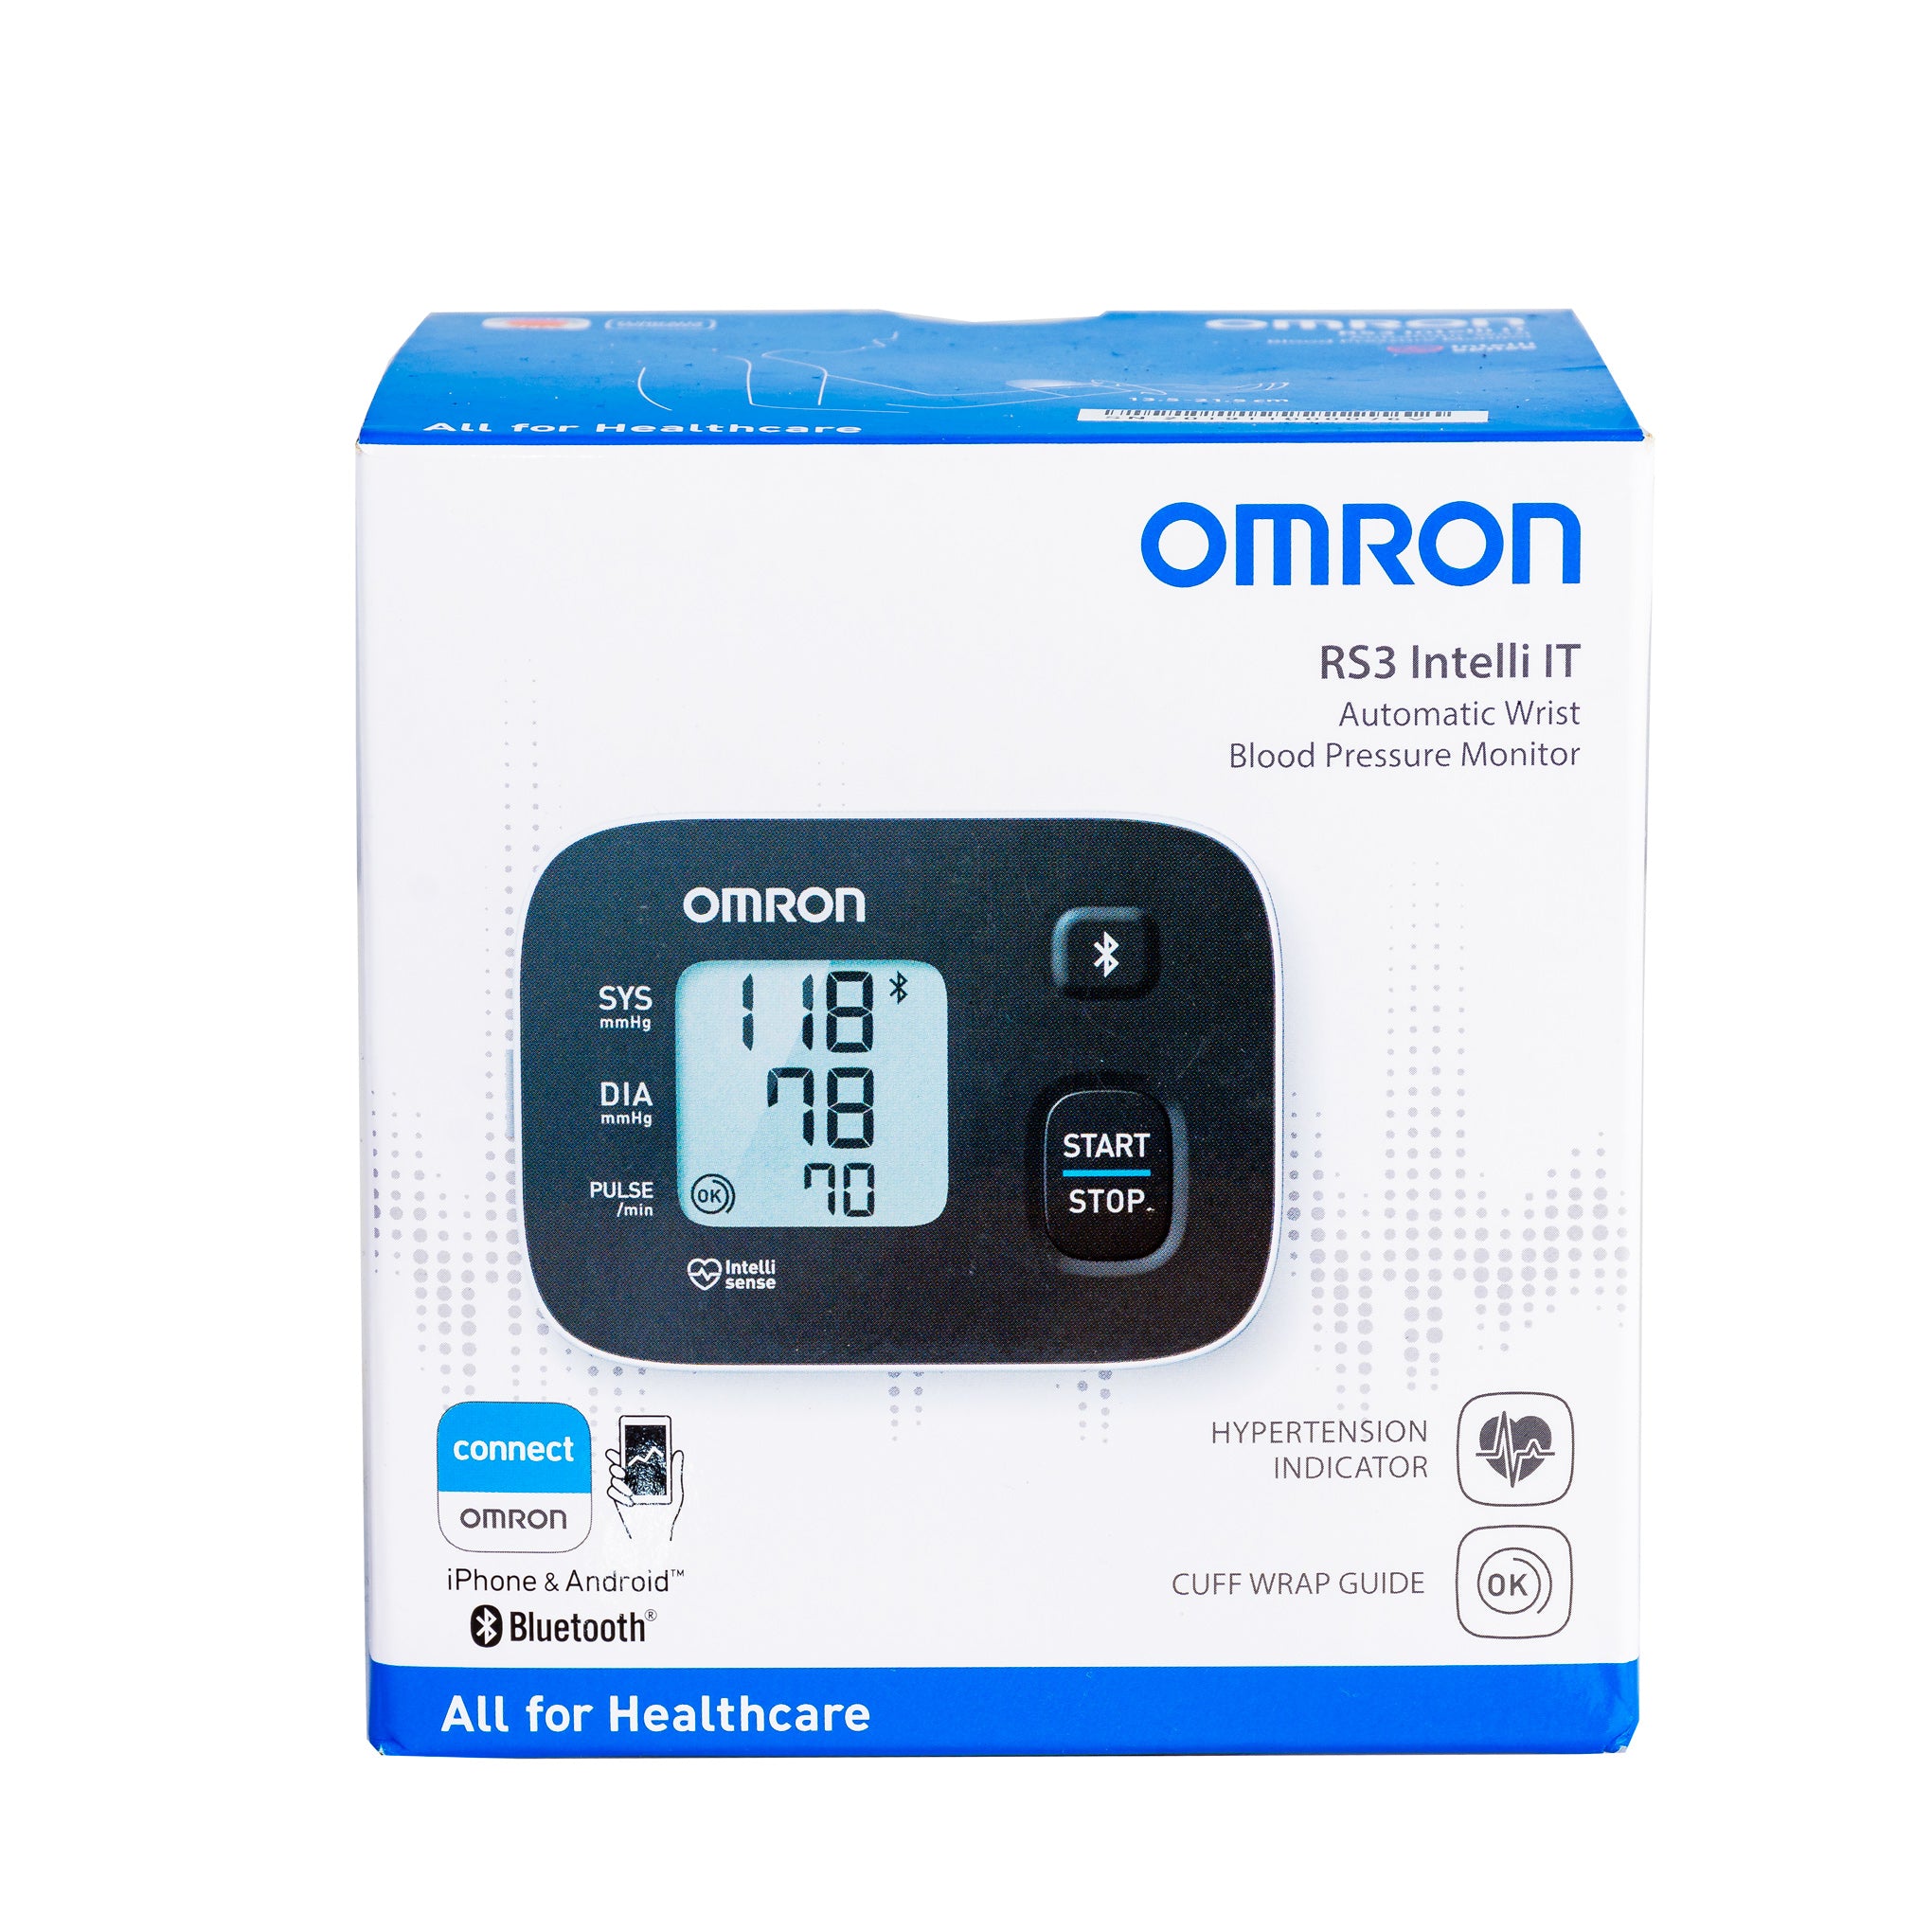 https://cdn.shopify.com/s/files/1/0562/3853/8907/products/omron-digital-blood-pressure-rx3rs3-series-wrist-monitor-1_q0gzgw_d4fe13e6-2e20-477e-9b6e-88d122b8a0ac.jpg?v=1698160921&width=2040